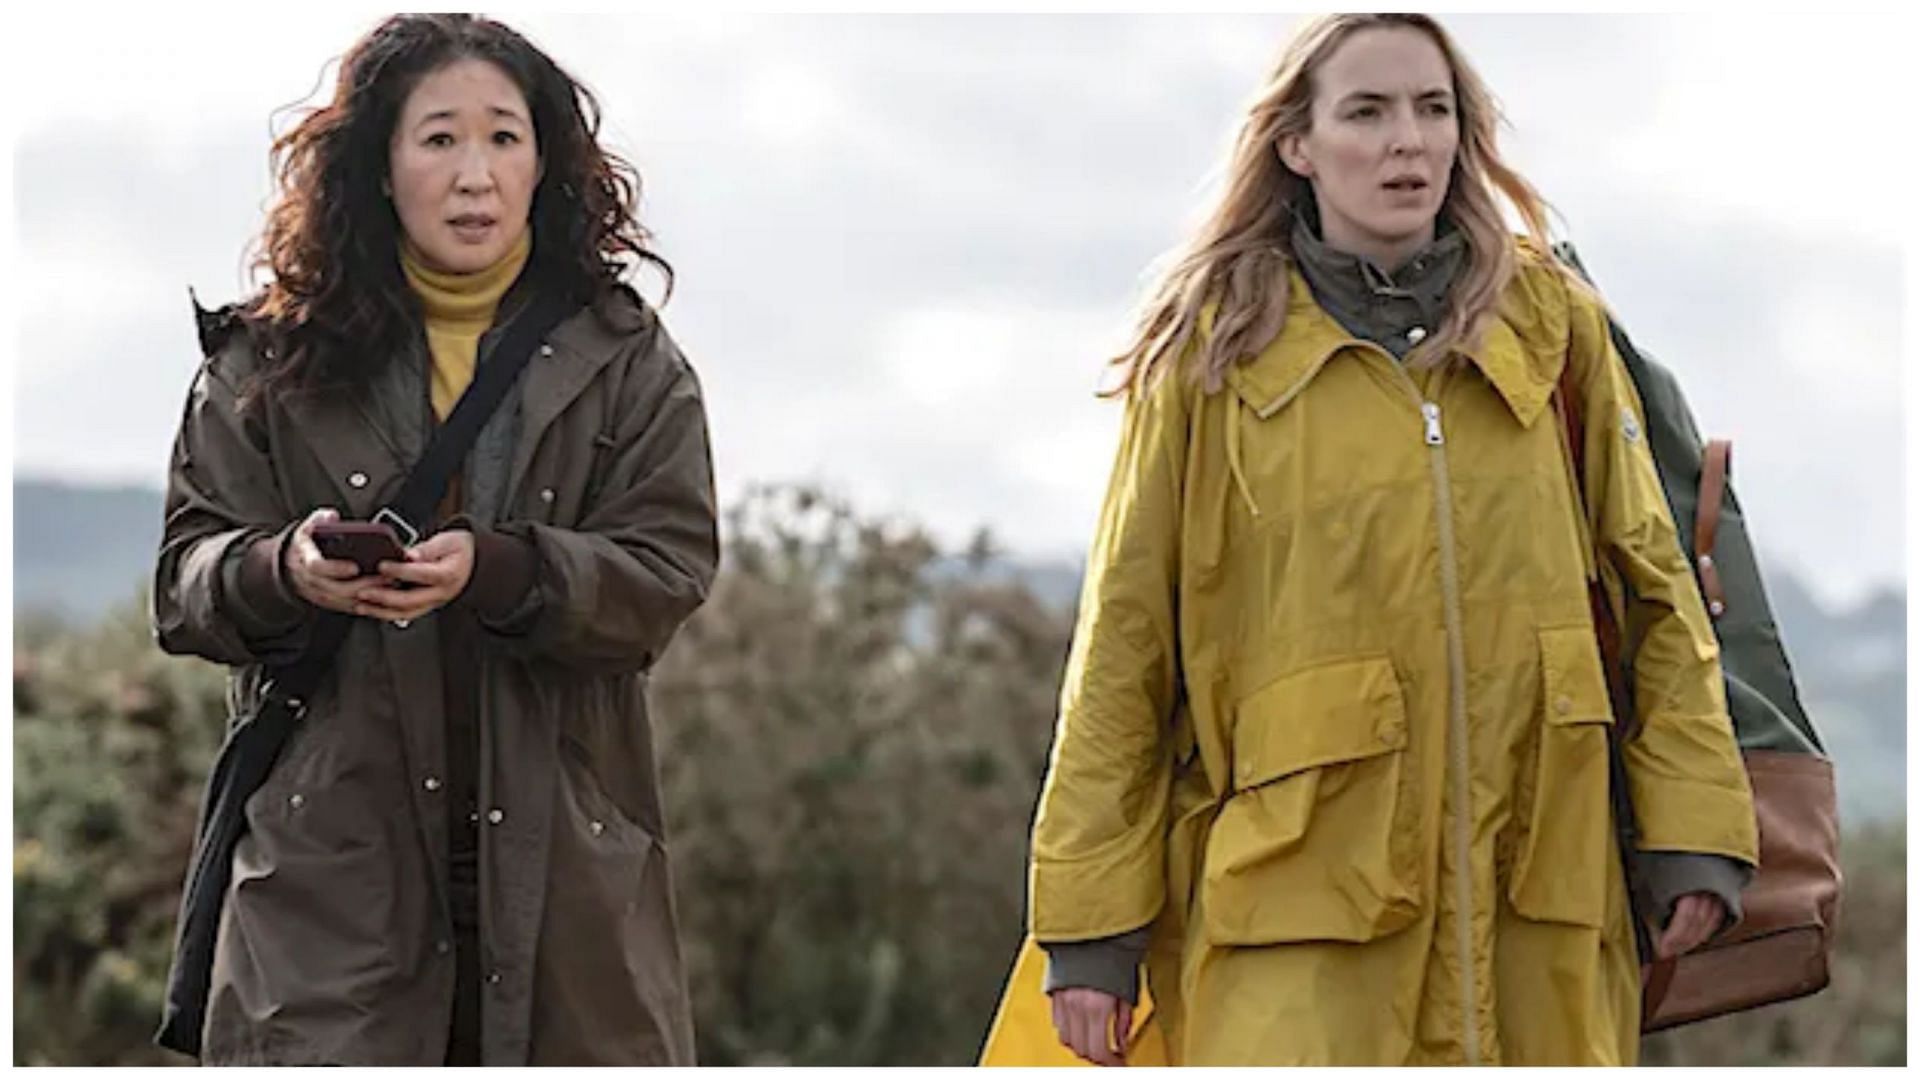 A closer look at Eve and Villanelle&rsquo;s stories in the &lsquo;Killing Eve&rsquo; finale (Image via BBC America)